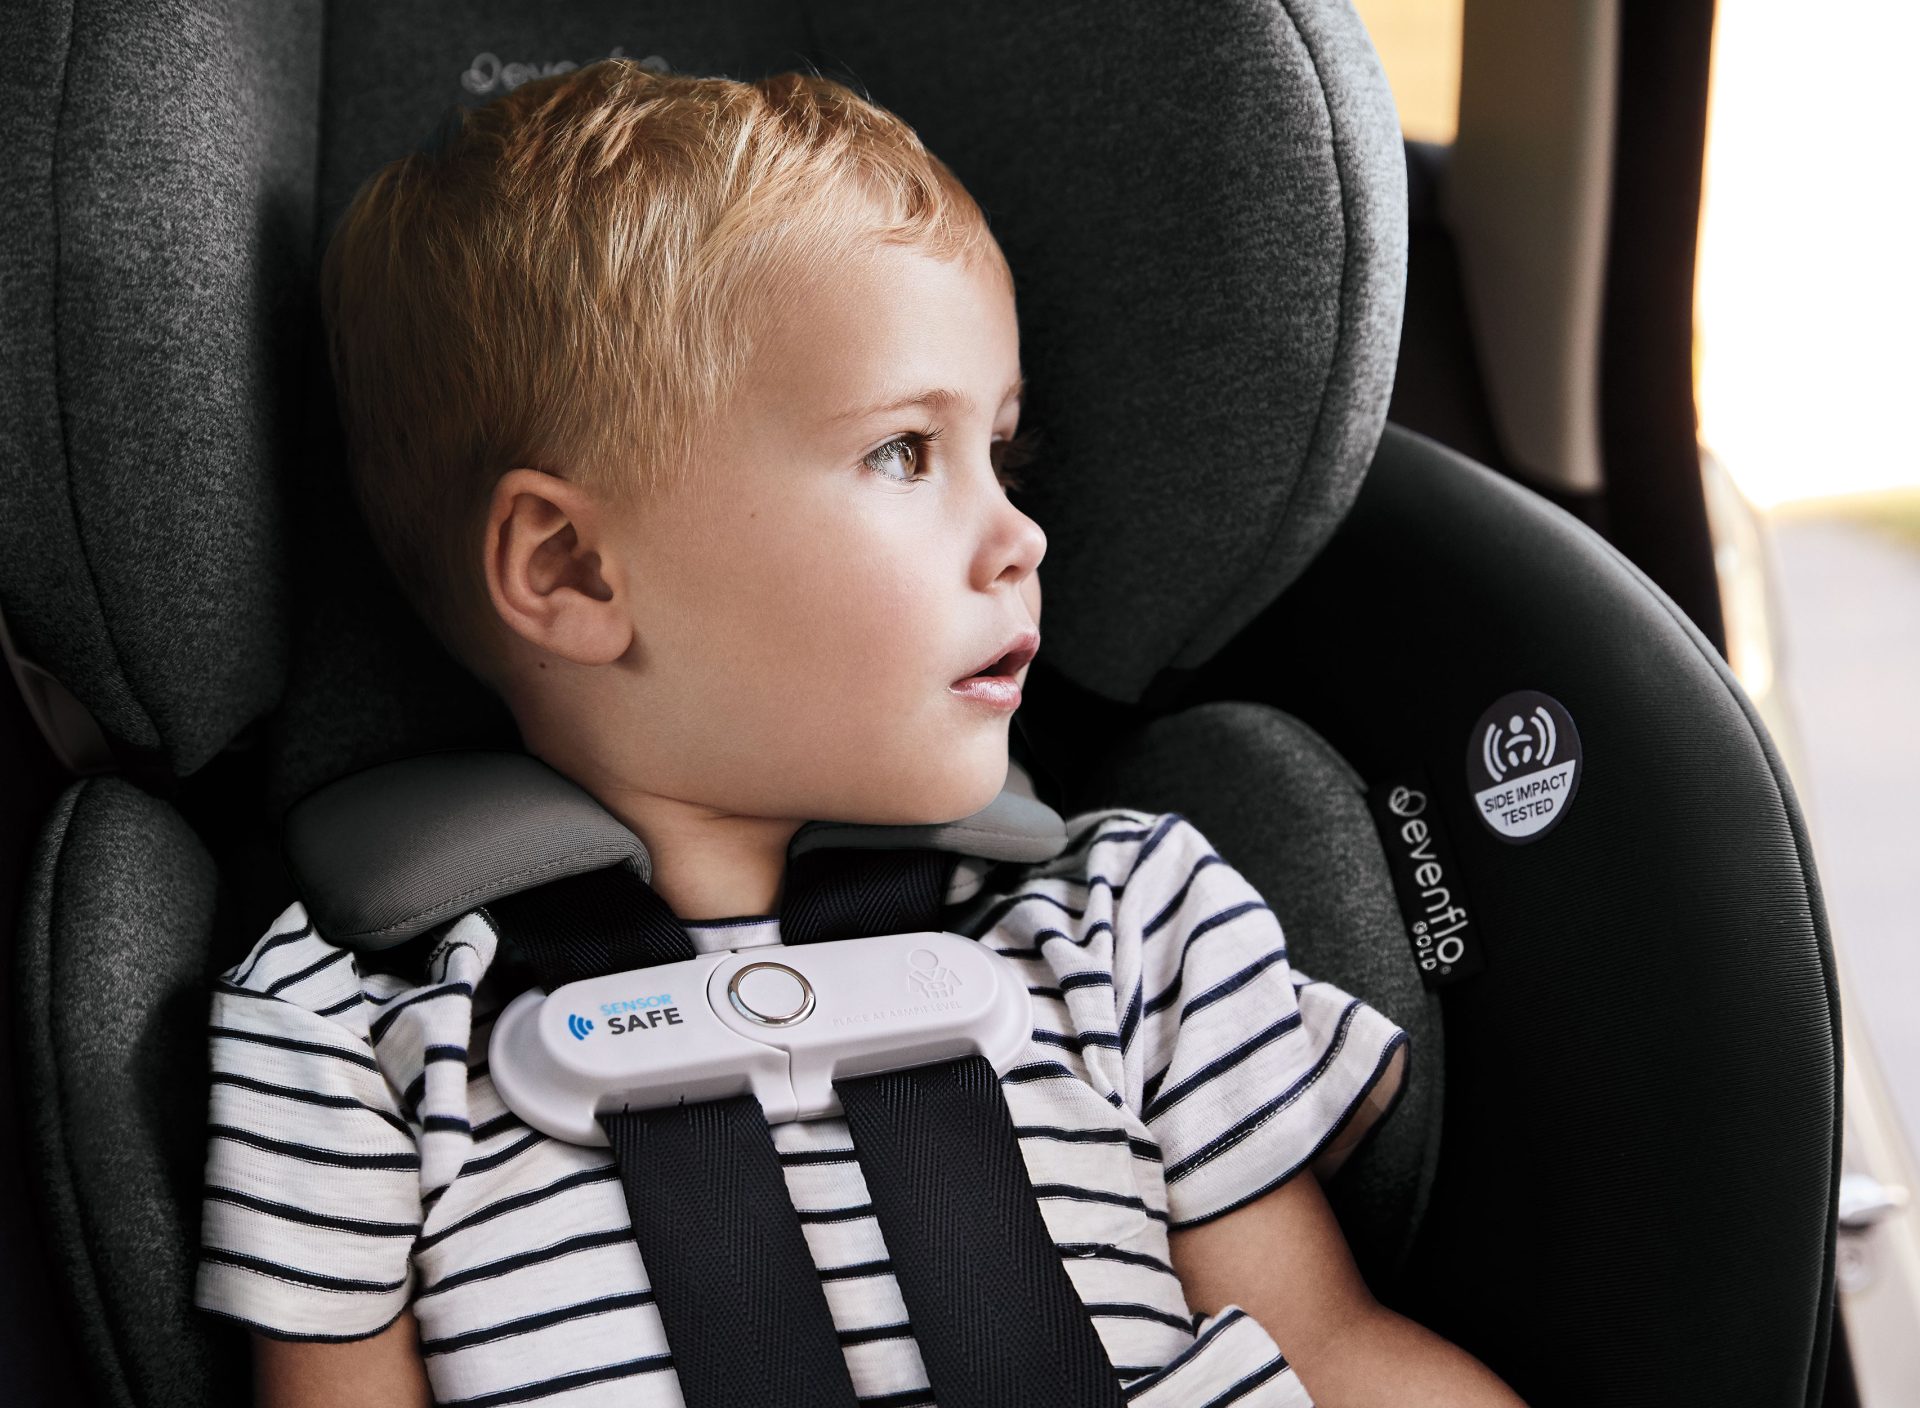 Back to School Car Safety Tips for Working Moms (+ giveaway!)